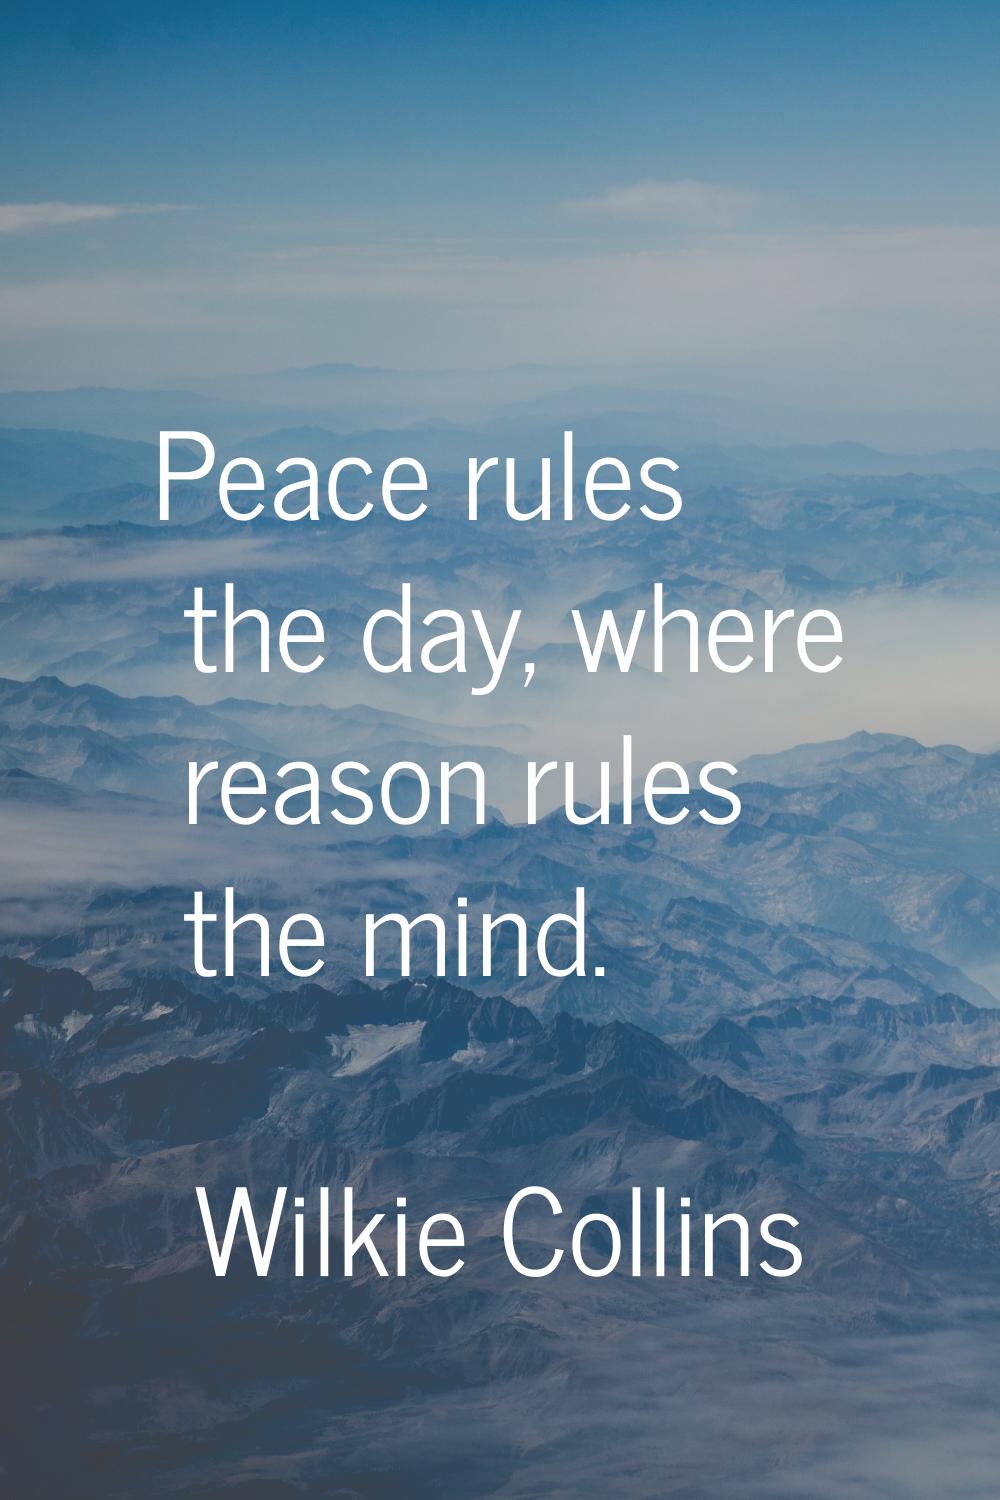 Peace rules the day, where reason rules the mind.